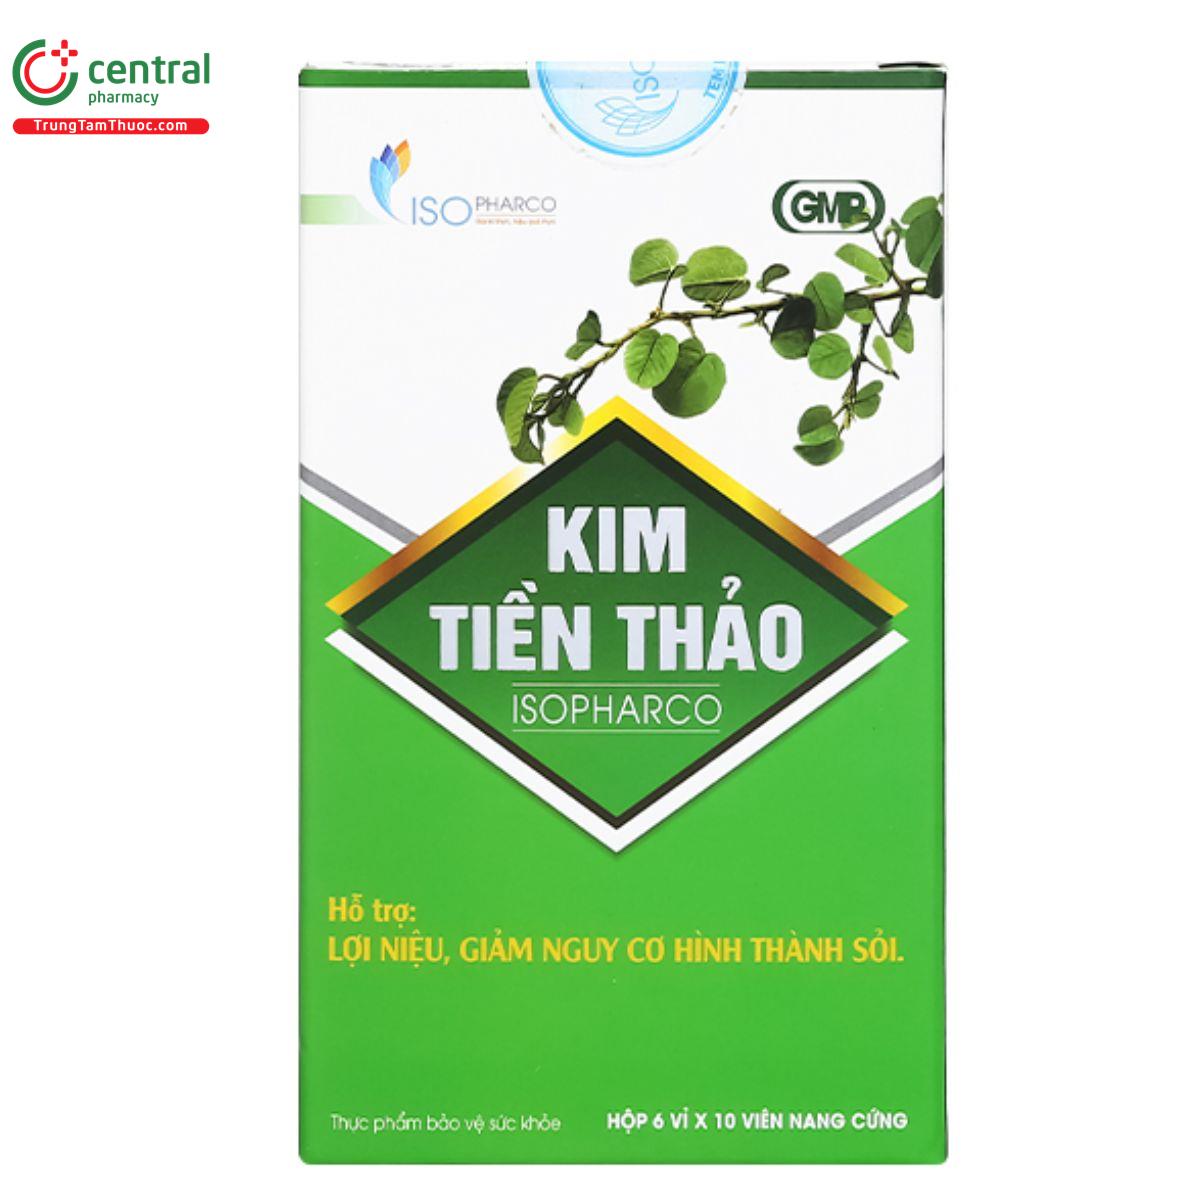 kim tien thao isopharco 3 A0043